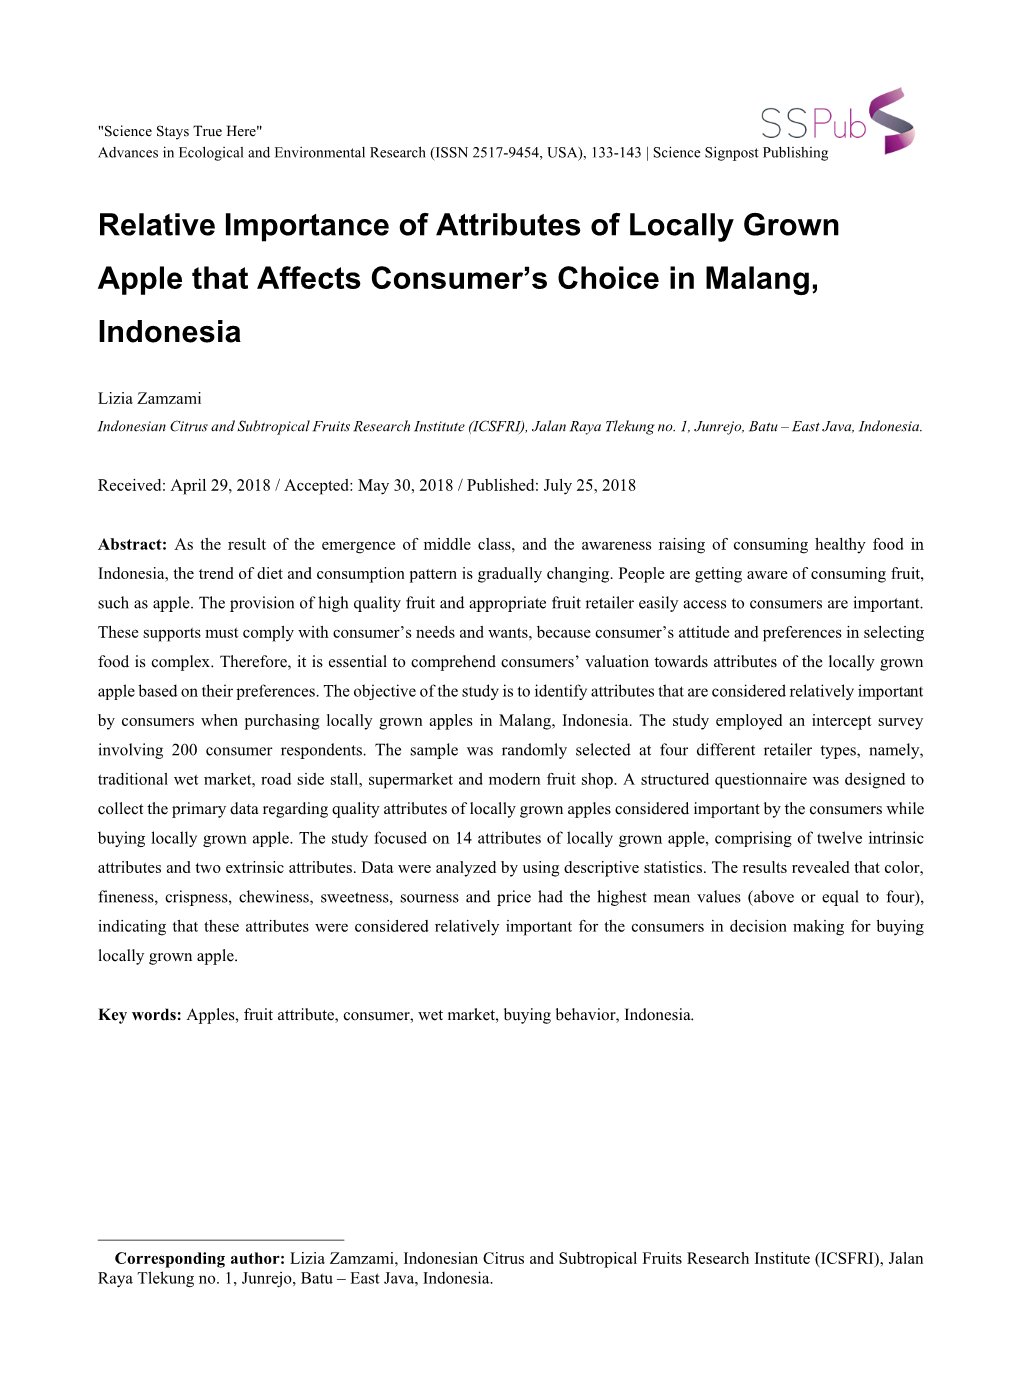 Relative Importance of Attributes of Locally Grown Apple That Affects Consumer’S Choice in Malang, Indonesia